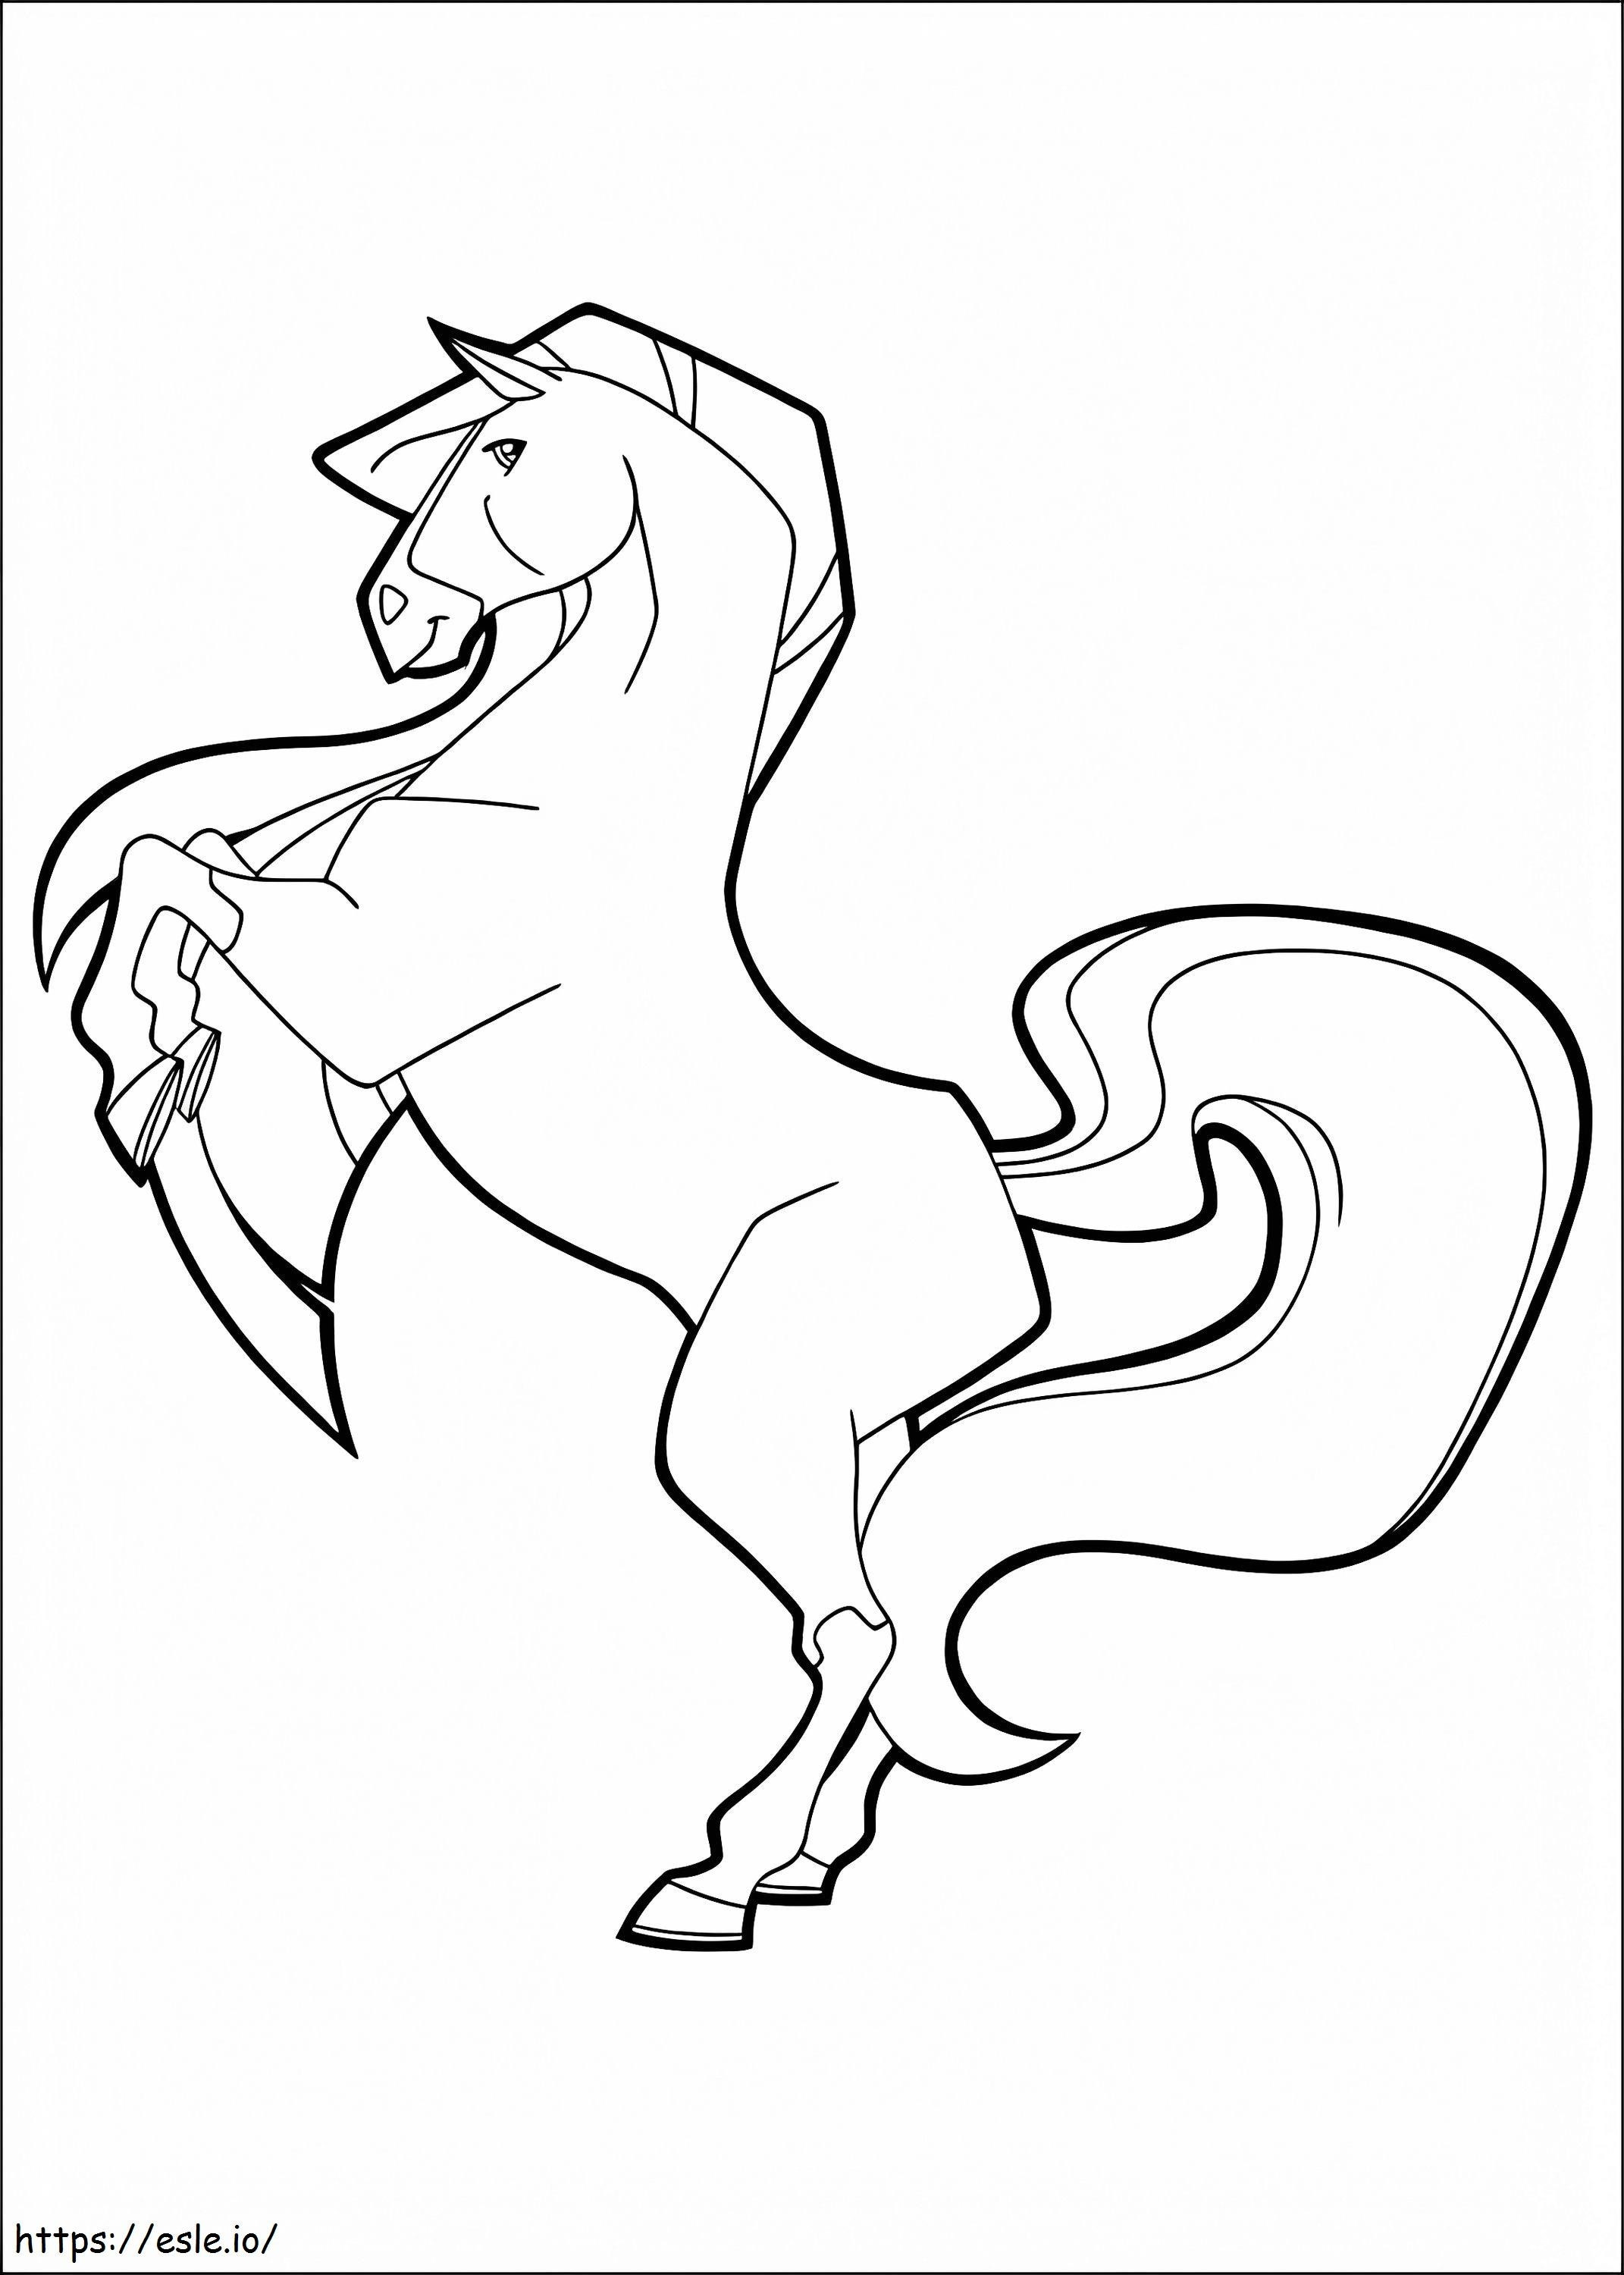 Horseland 2 coloring page